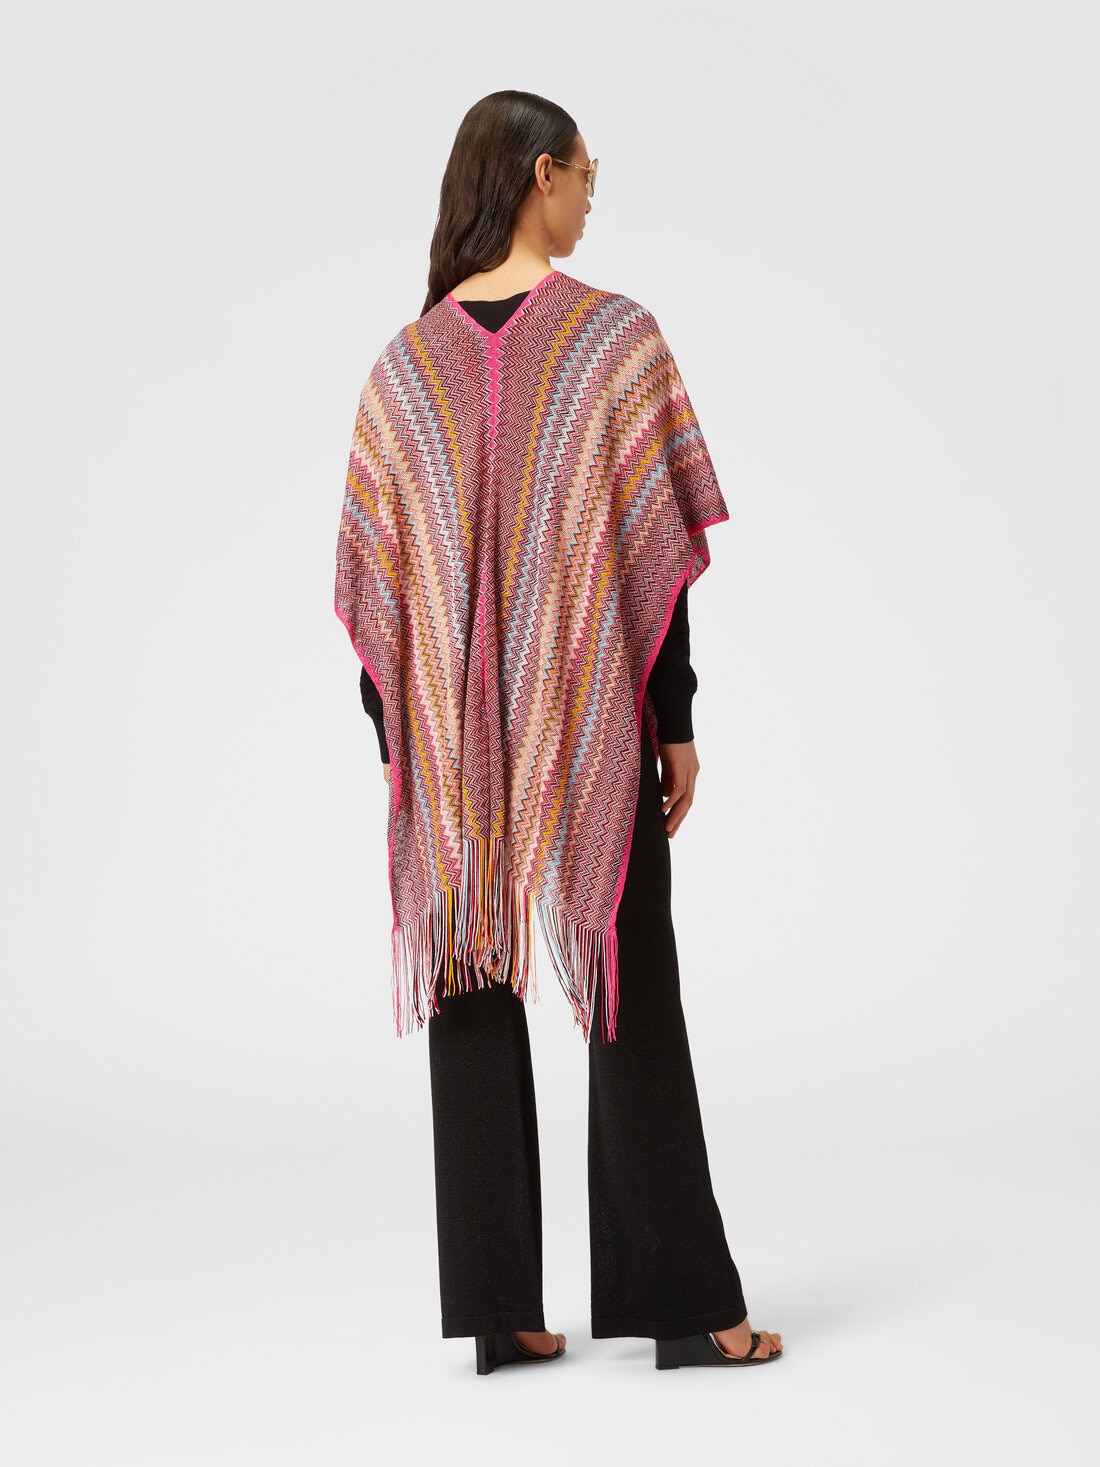 Poncho in zigzag viscose knit with fringes, Multicoloured  - 8053147141220 - 2